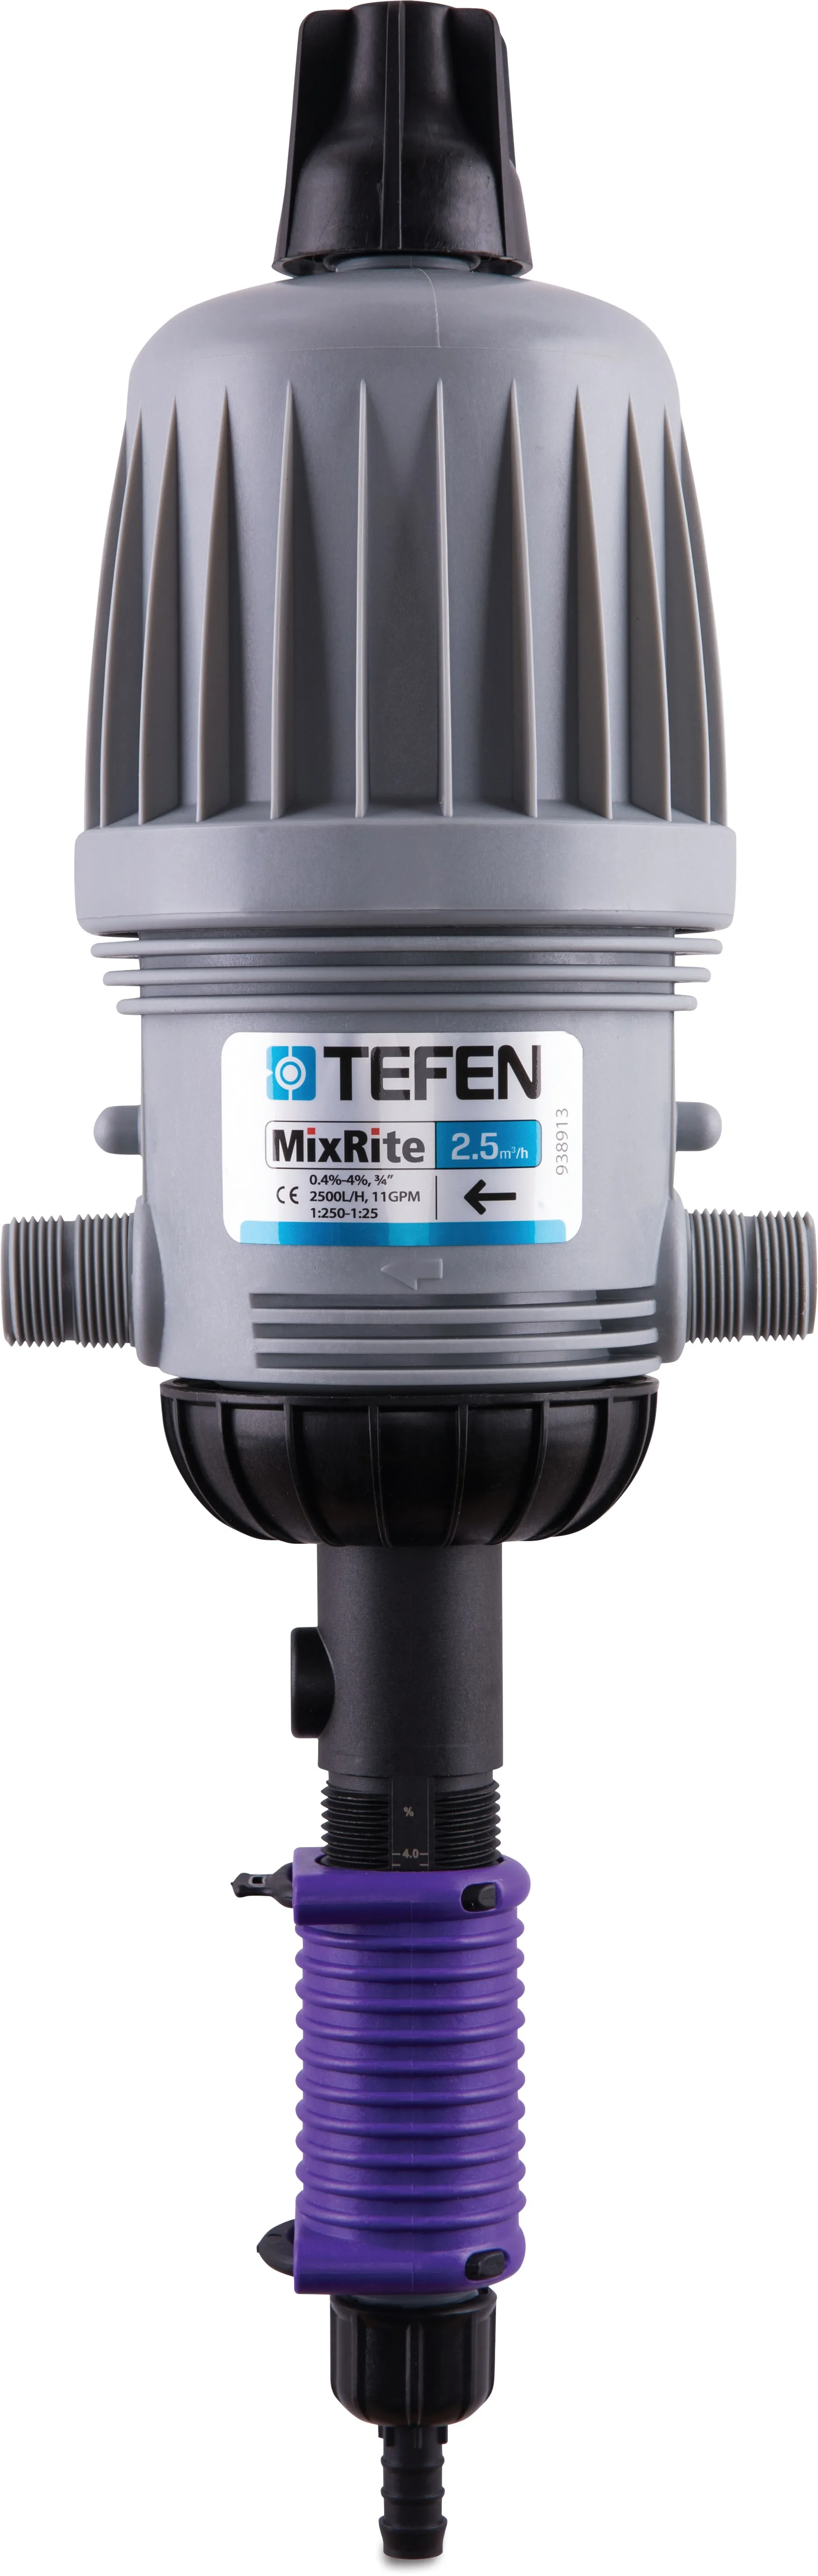 Tefen Dosing pump 3/4" x 10 mm x 3/4" male thread x hose tail x male thread type MixRite 2.5 On/Off chlorine 0.3% - 2%